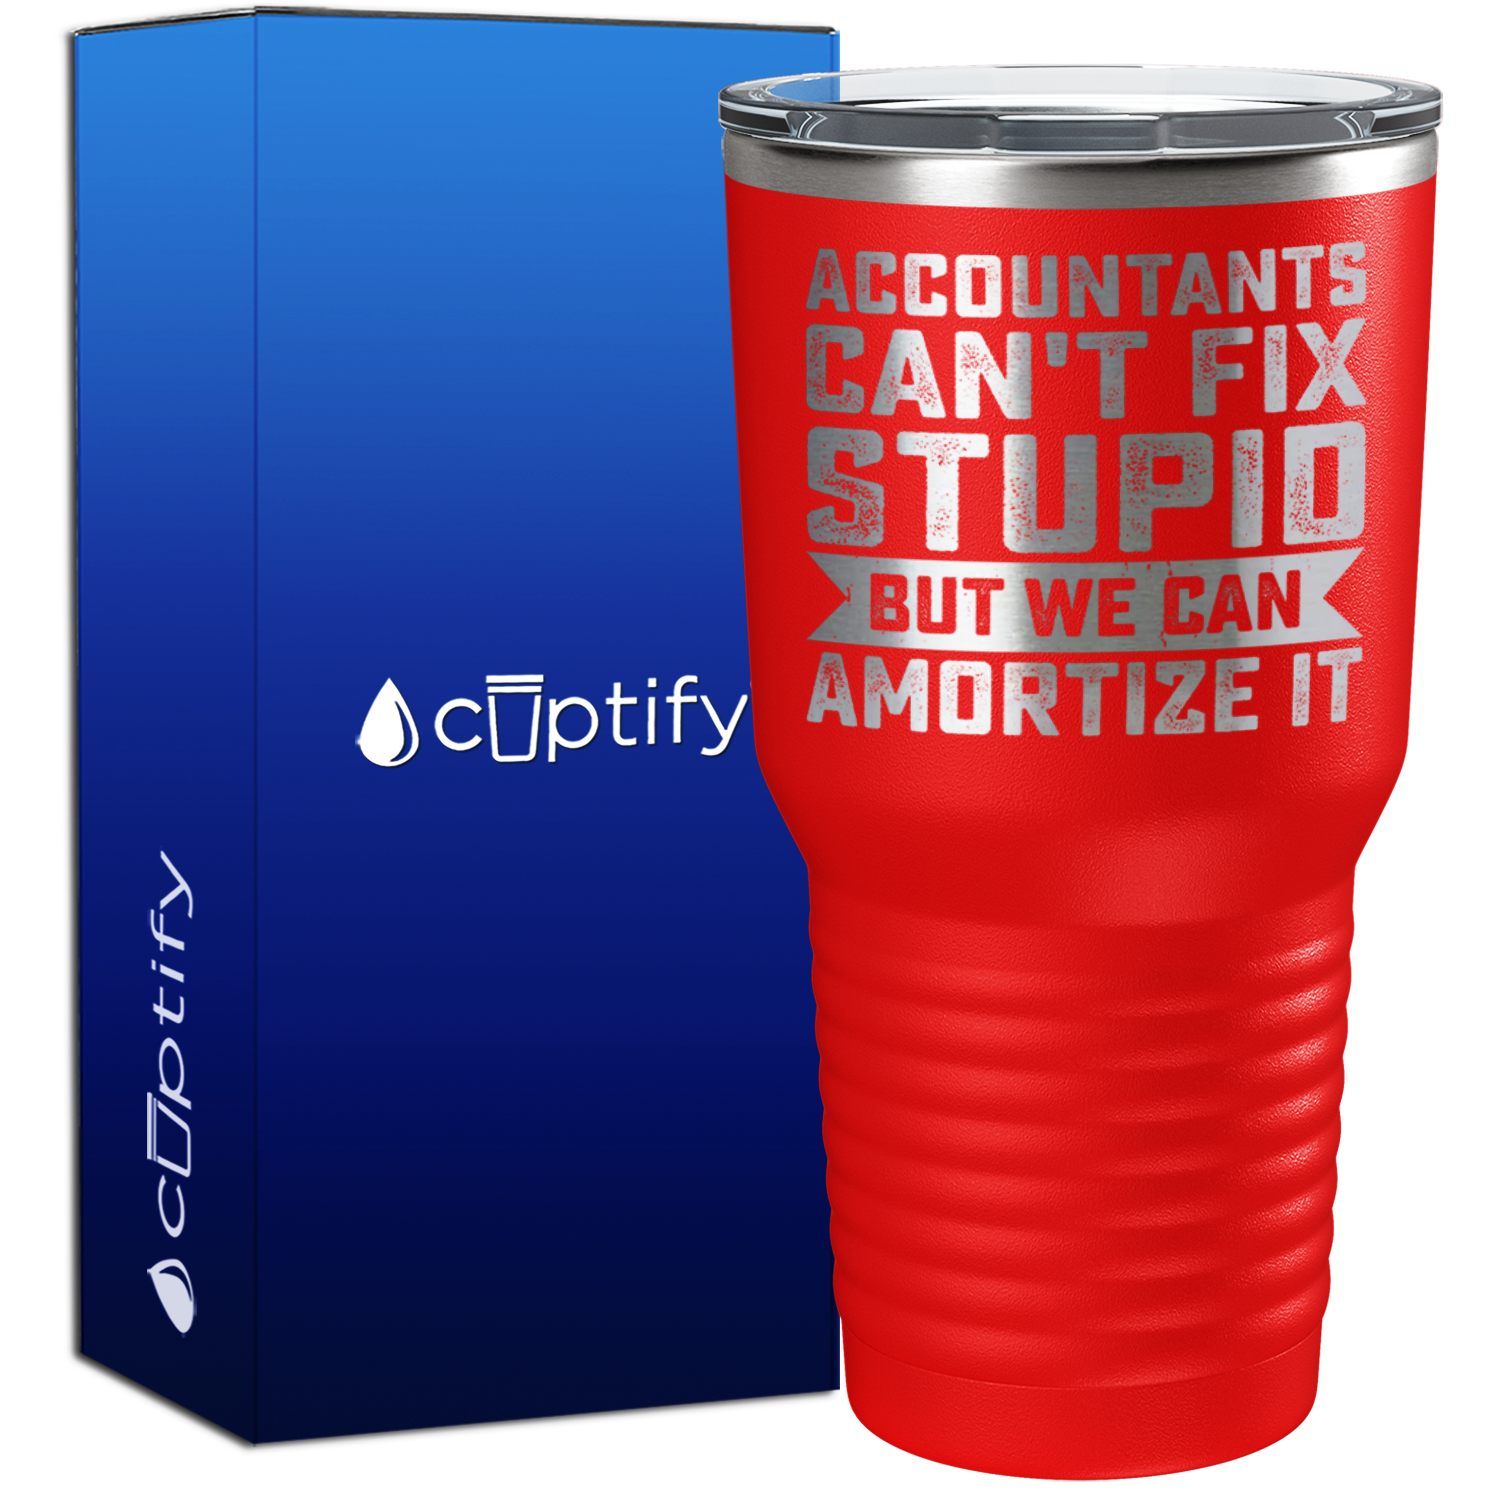 Accountants Can't Fix Stupid but we can Amortize it 30oz Accountant Tumbler